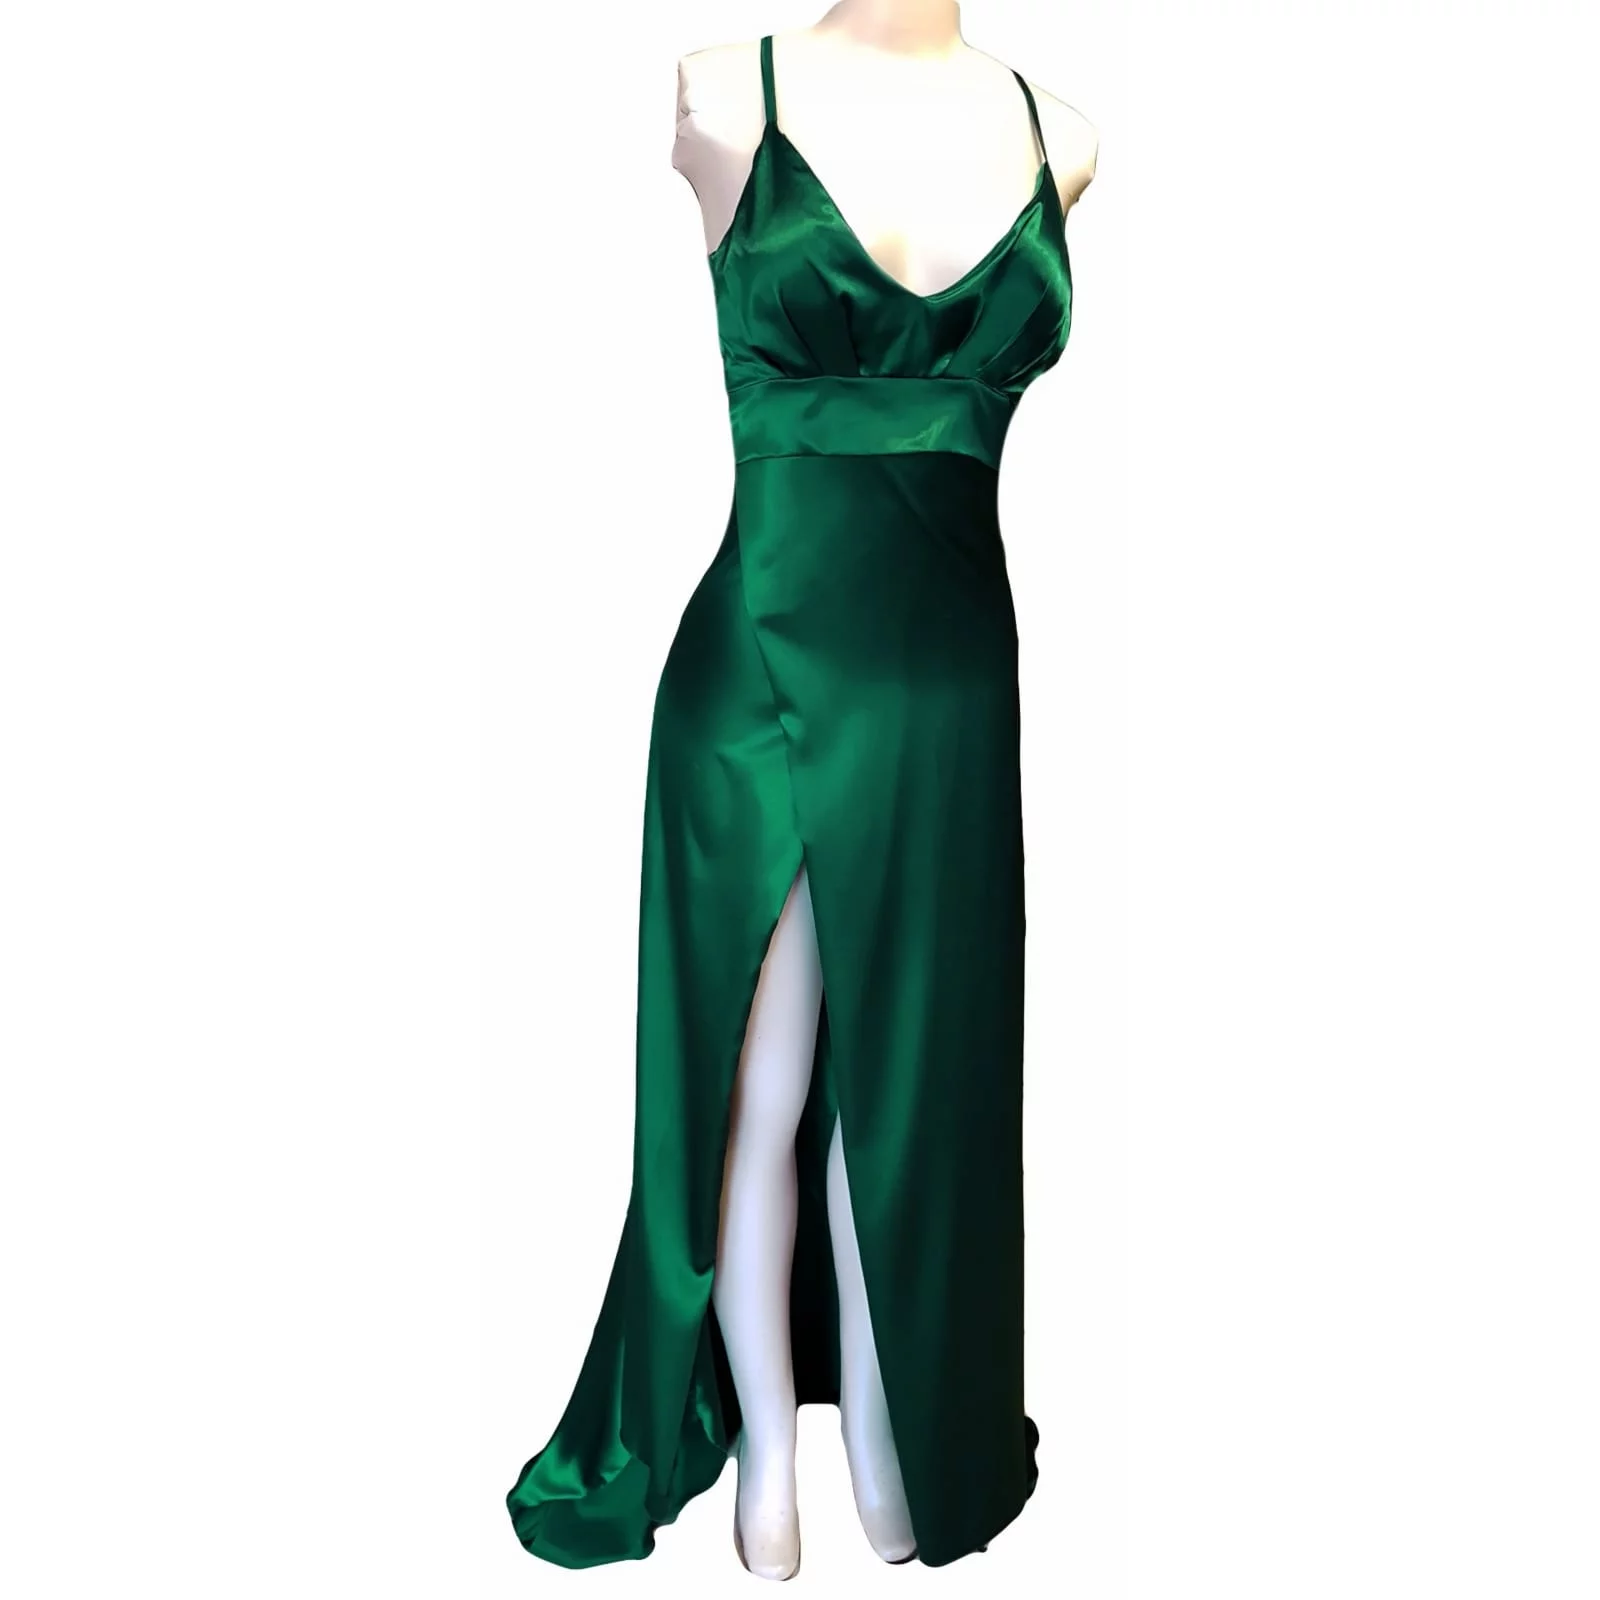 Emerald green long satin matric farewell dress 5 emerald green long satin matric farewell dress. With a high crossed slit and a train.